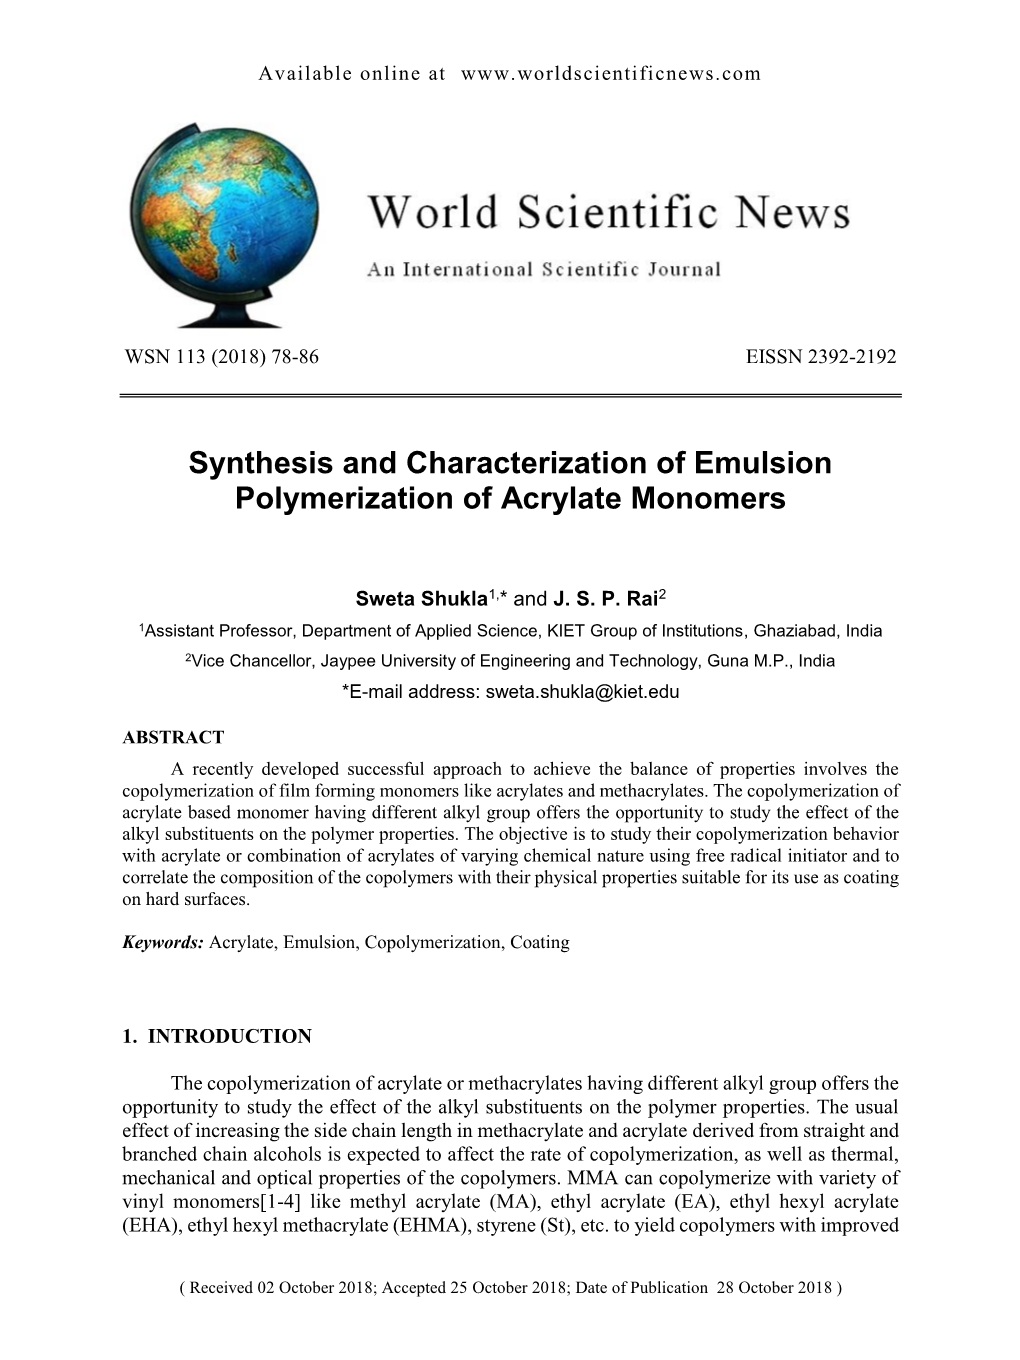 Synthesis and Characterization of Emulsion Polymerization of Acrylate Monomers